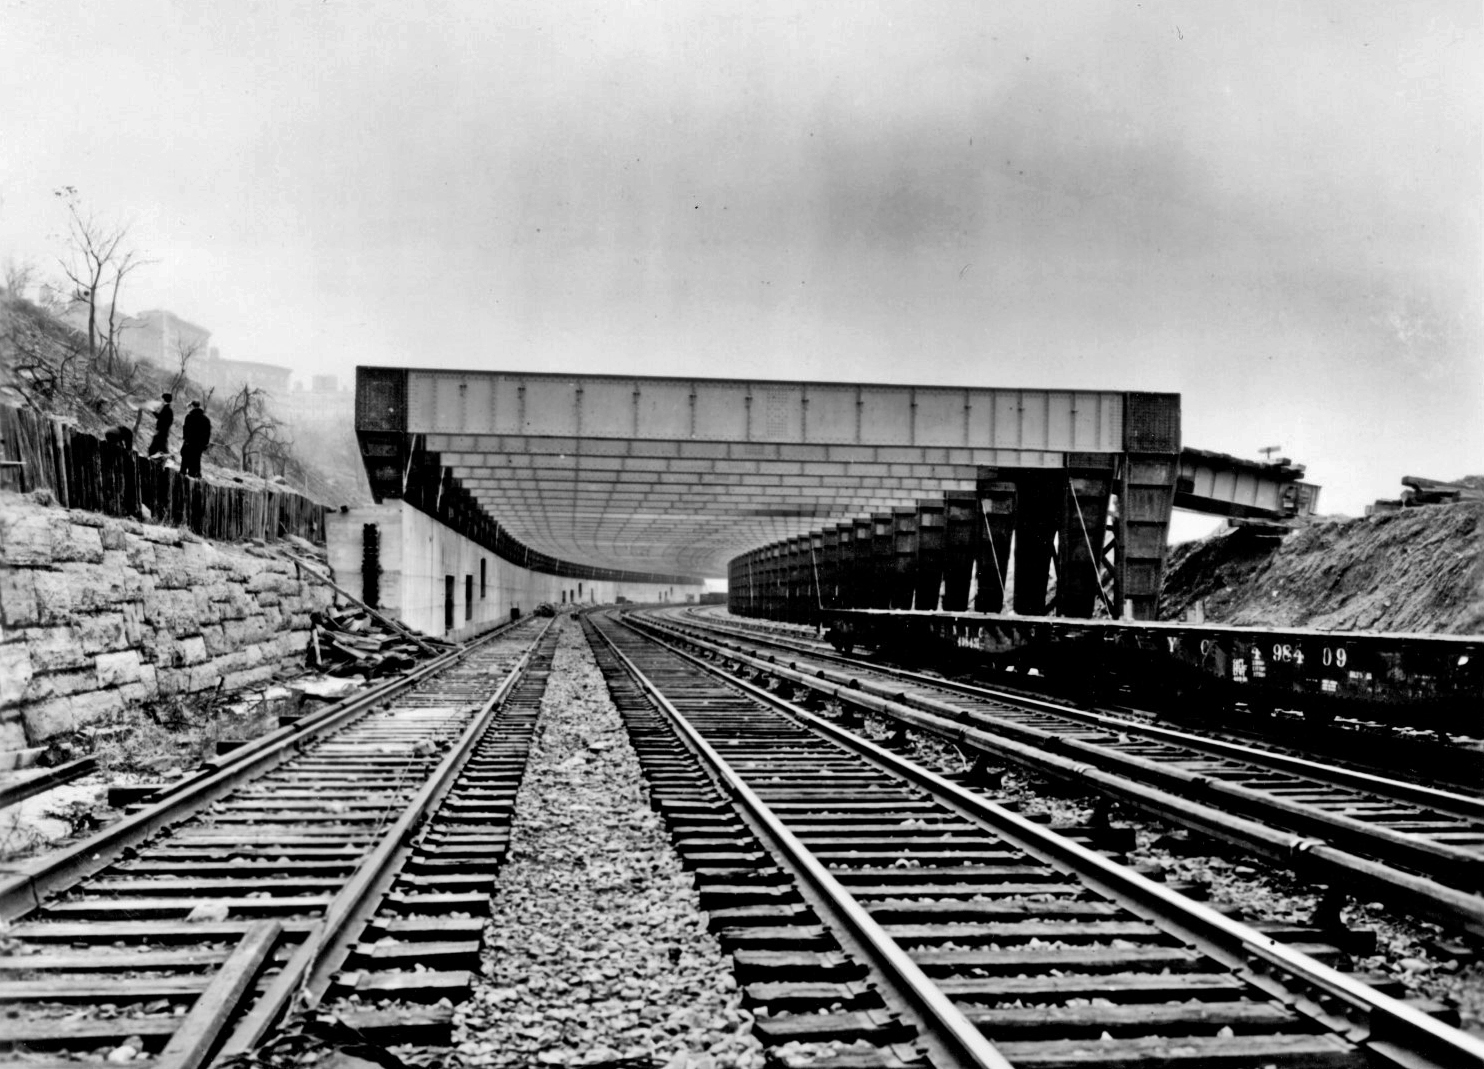 Construction taking place to cover the railroad tracks in 1937